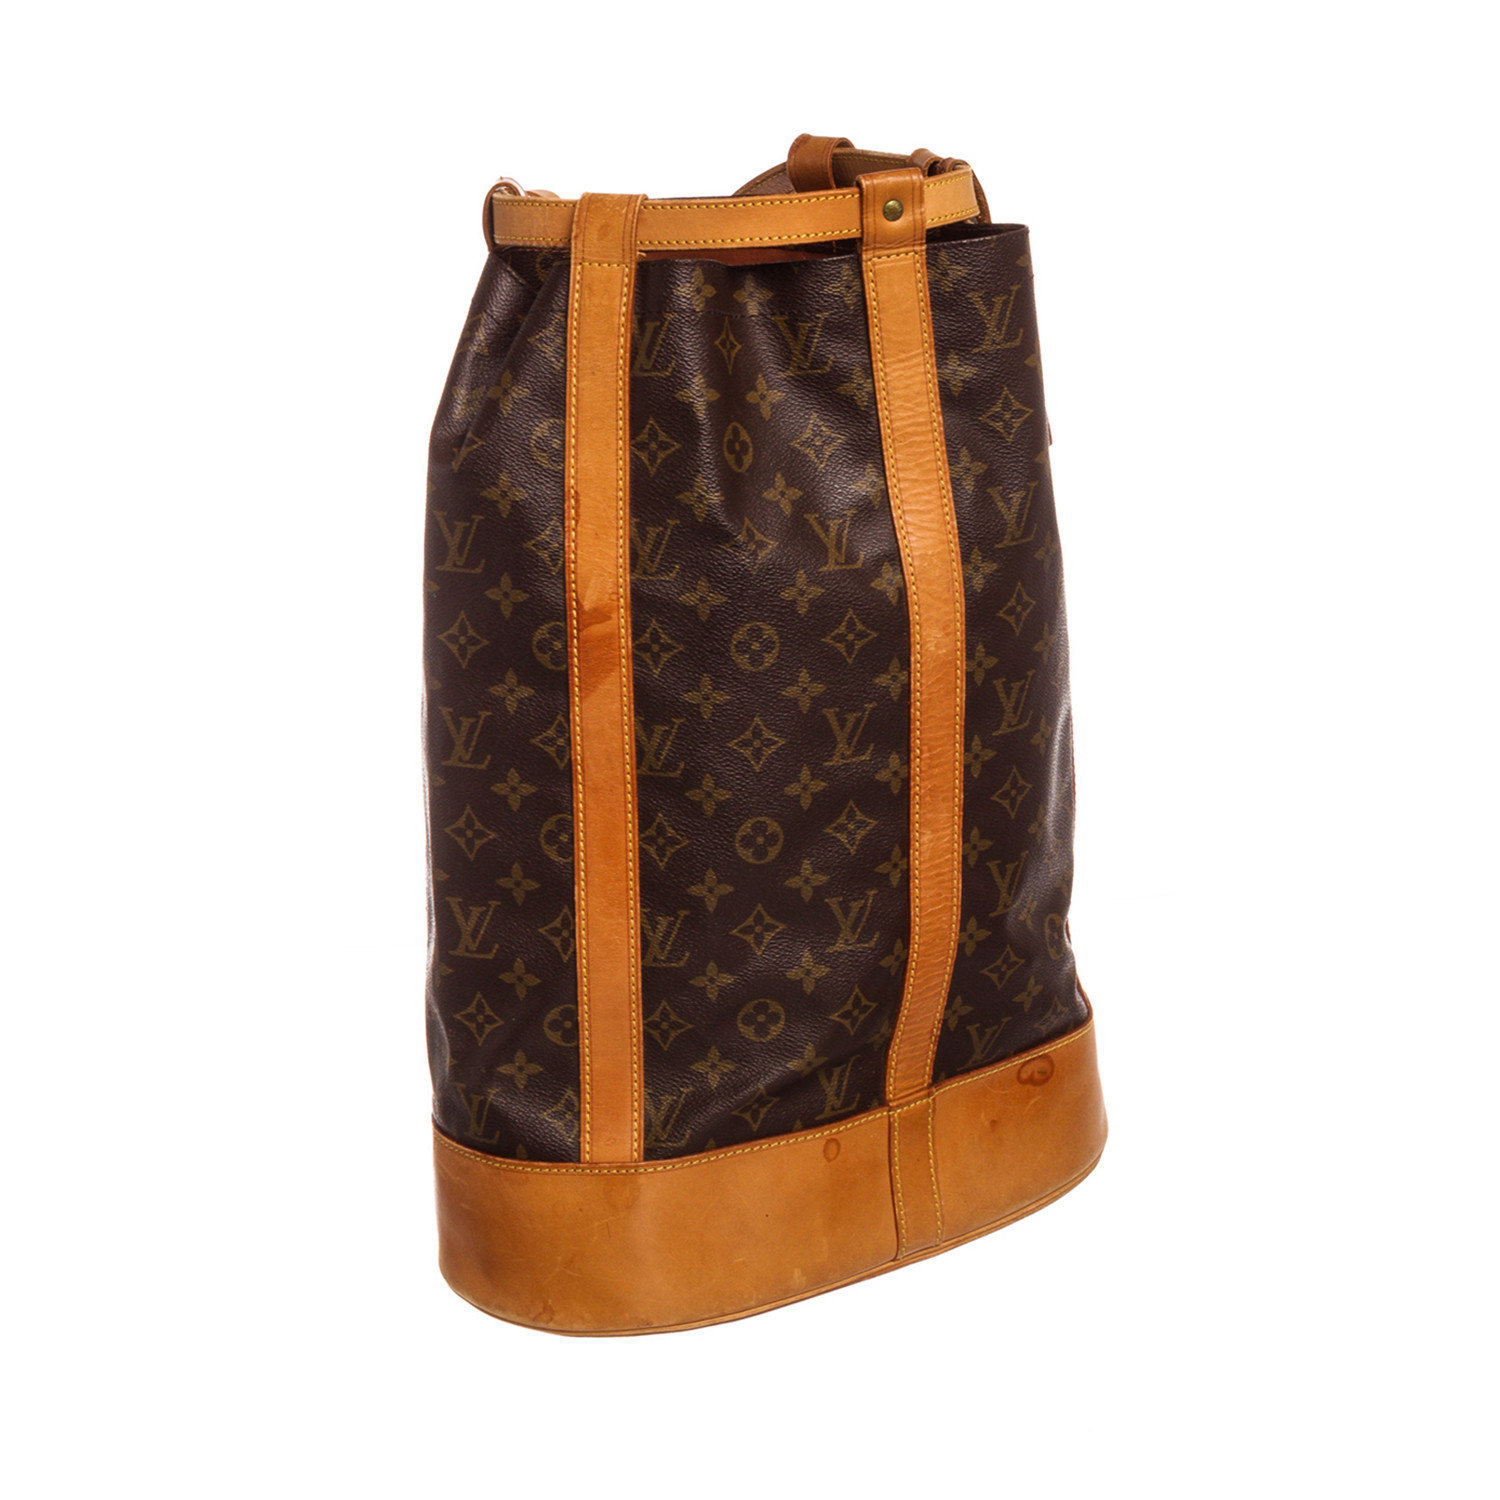 Louis Vuitton // Monogram Canvas Leather Randonne Backpack // 8910A2 // Pre-Owned - Pre-Owned ...